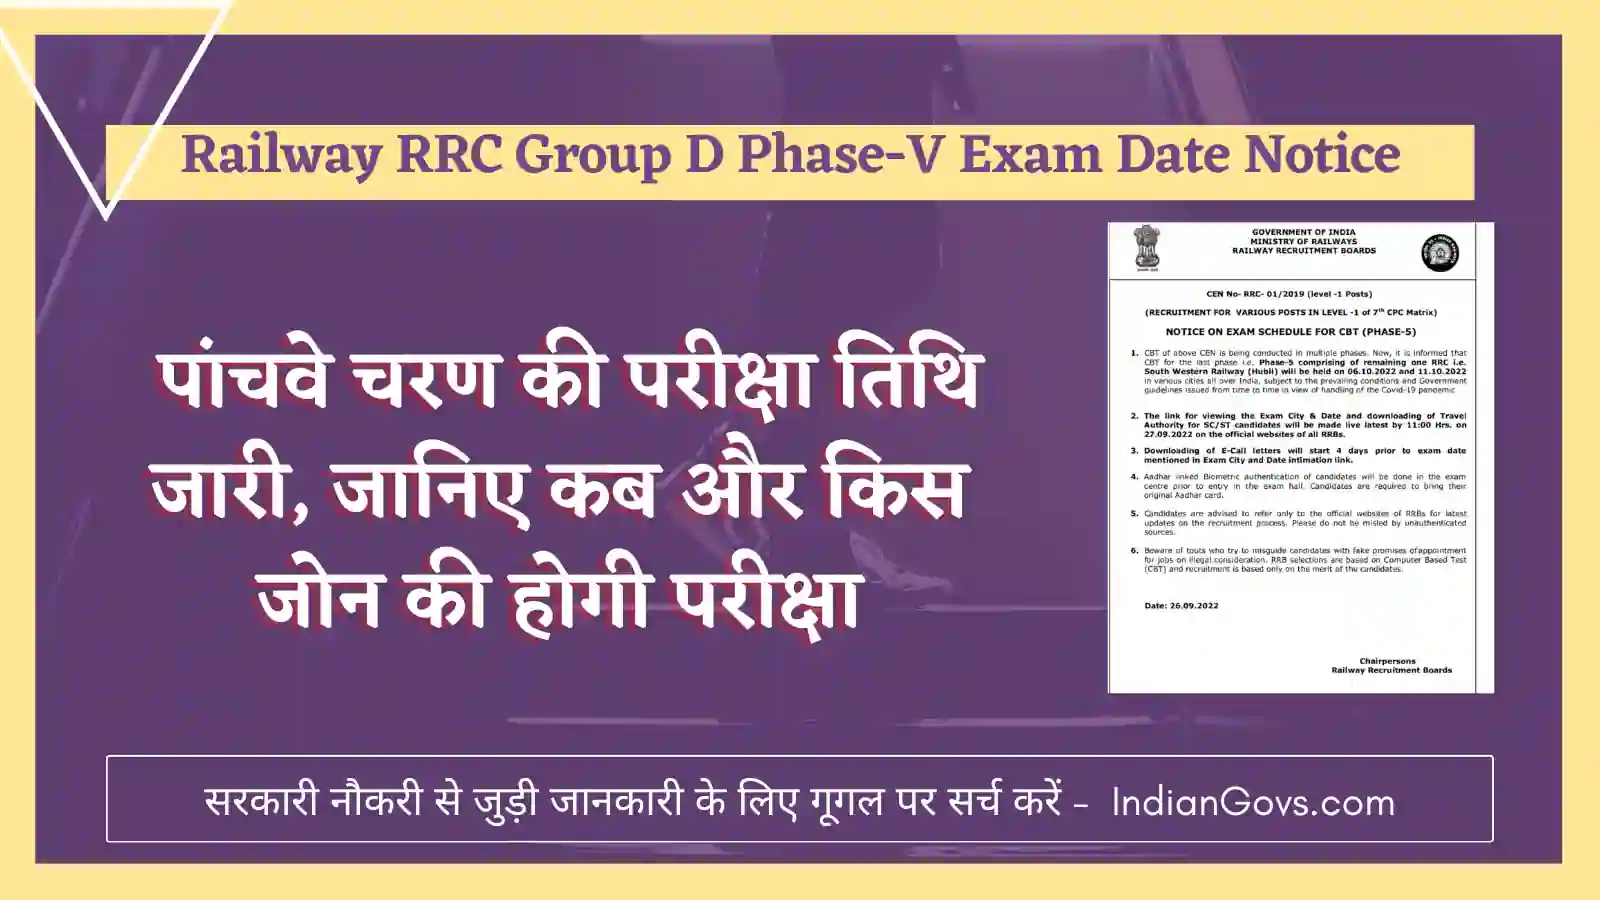 Railway RRC Group D Phase-V Exam Date Notice